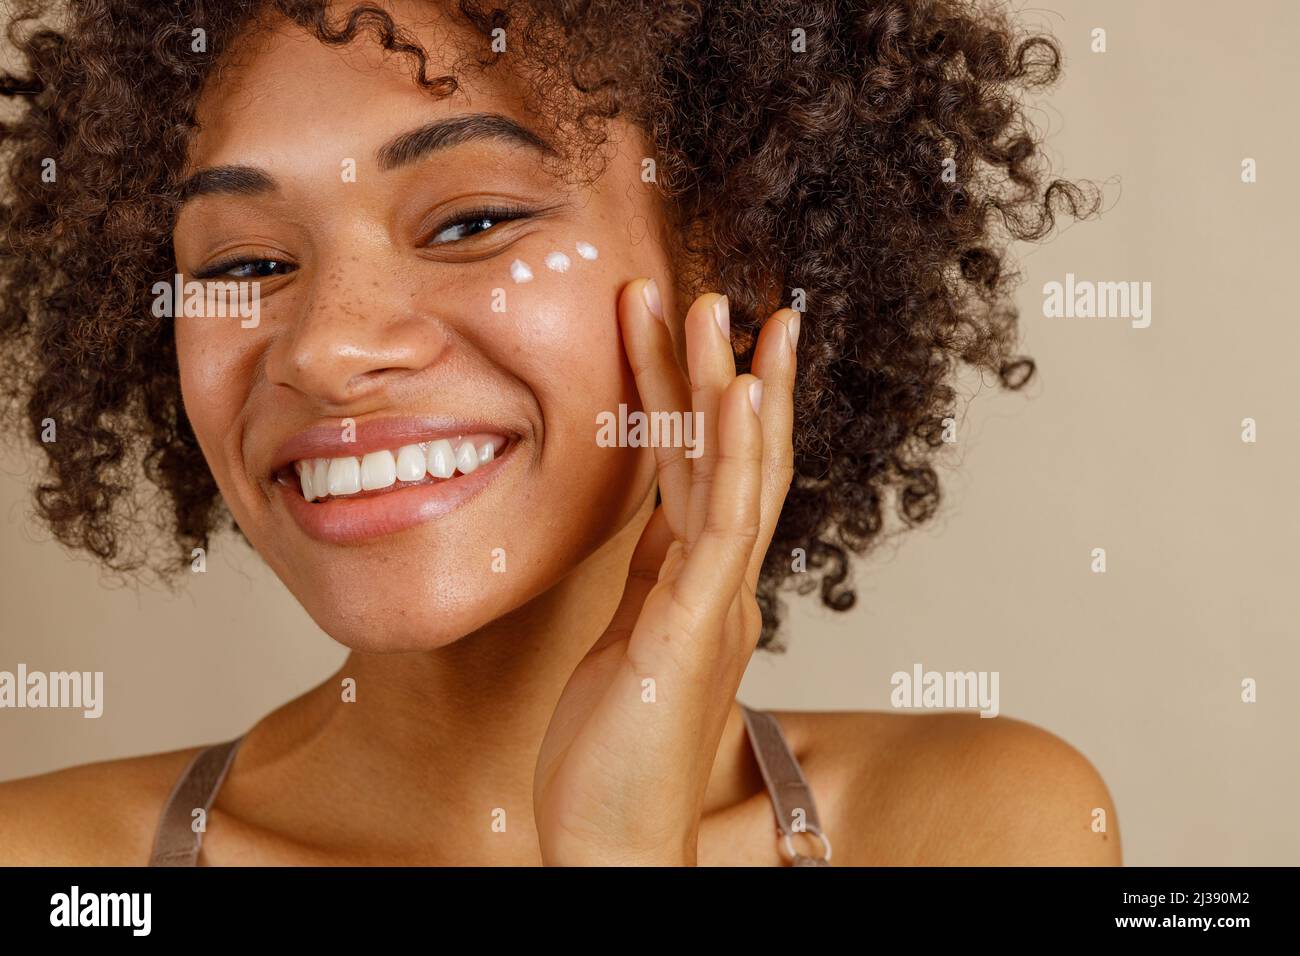 Young female model posing against beige wall Stock Photo